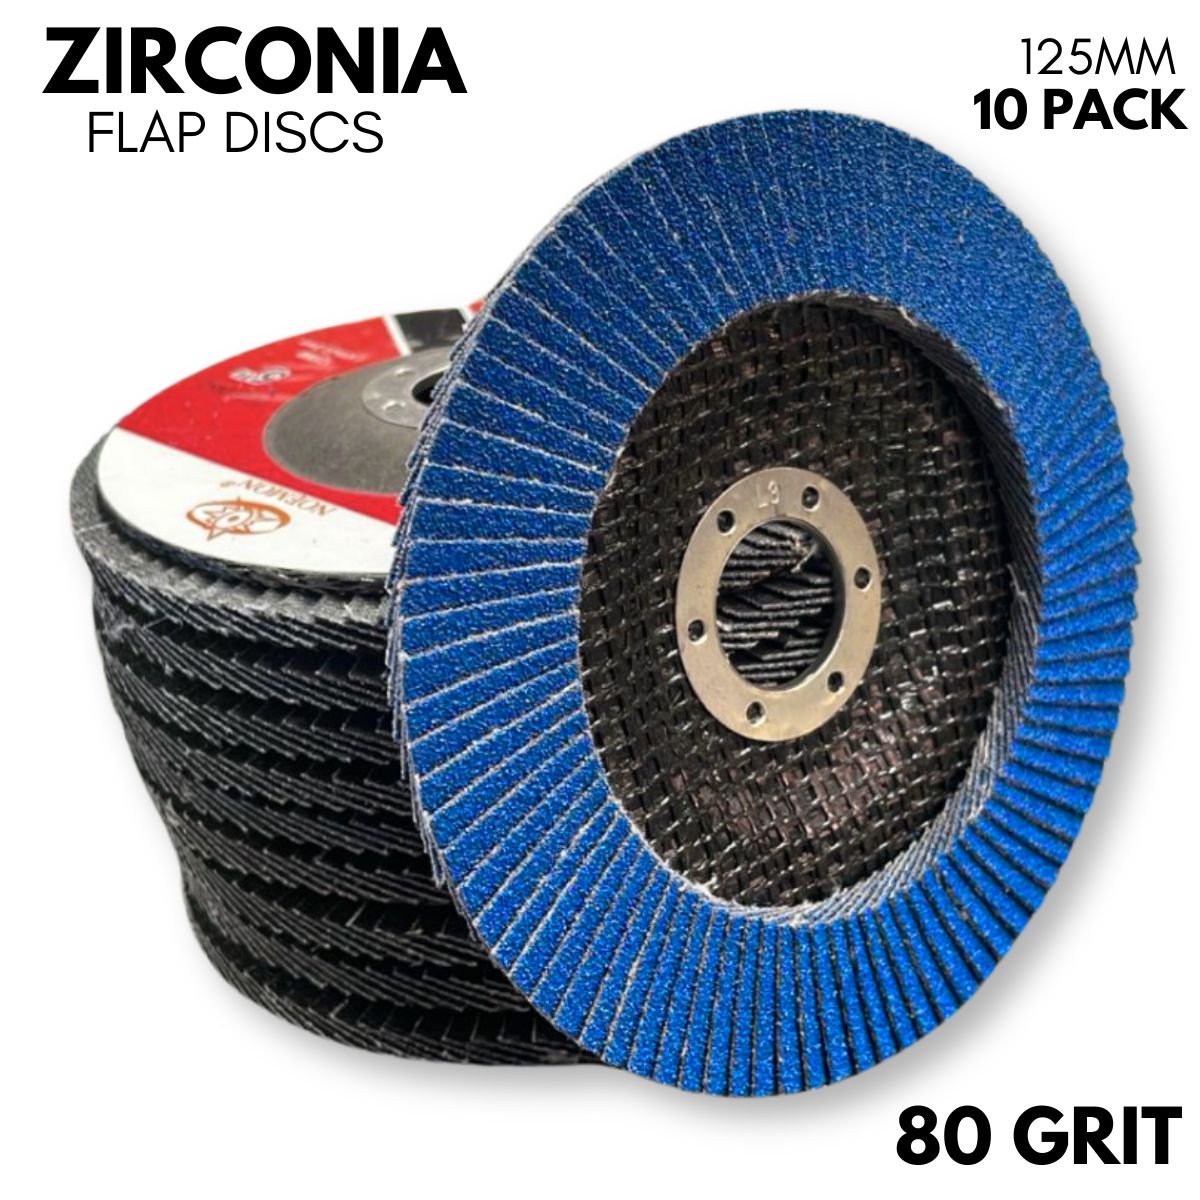 10 Pack | 125mm (5”) Flap Discs | 80 GRIT Zirconia - South East Clearance Centre